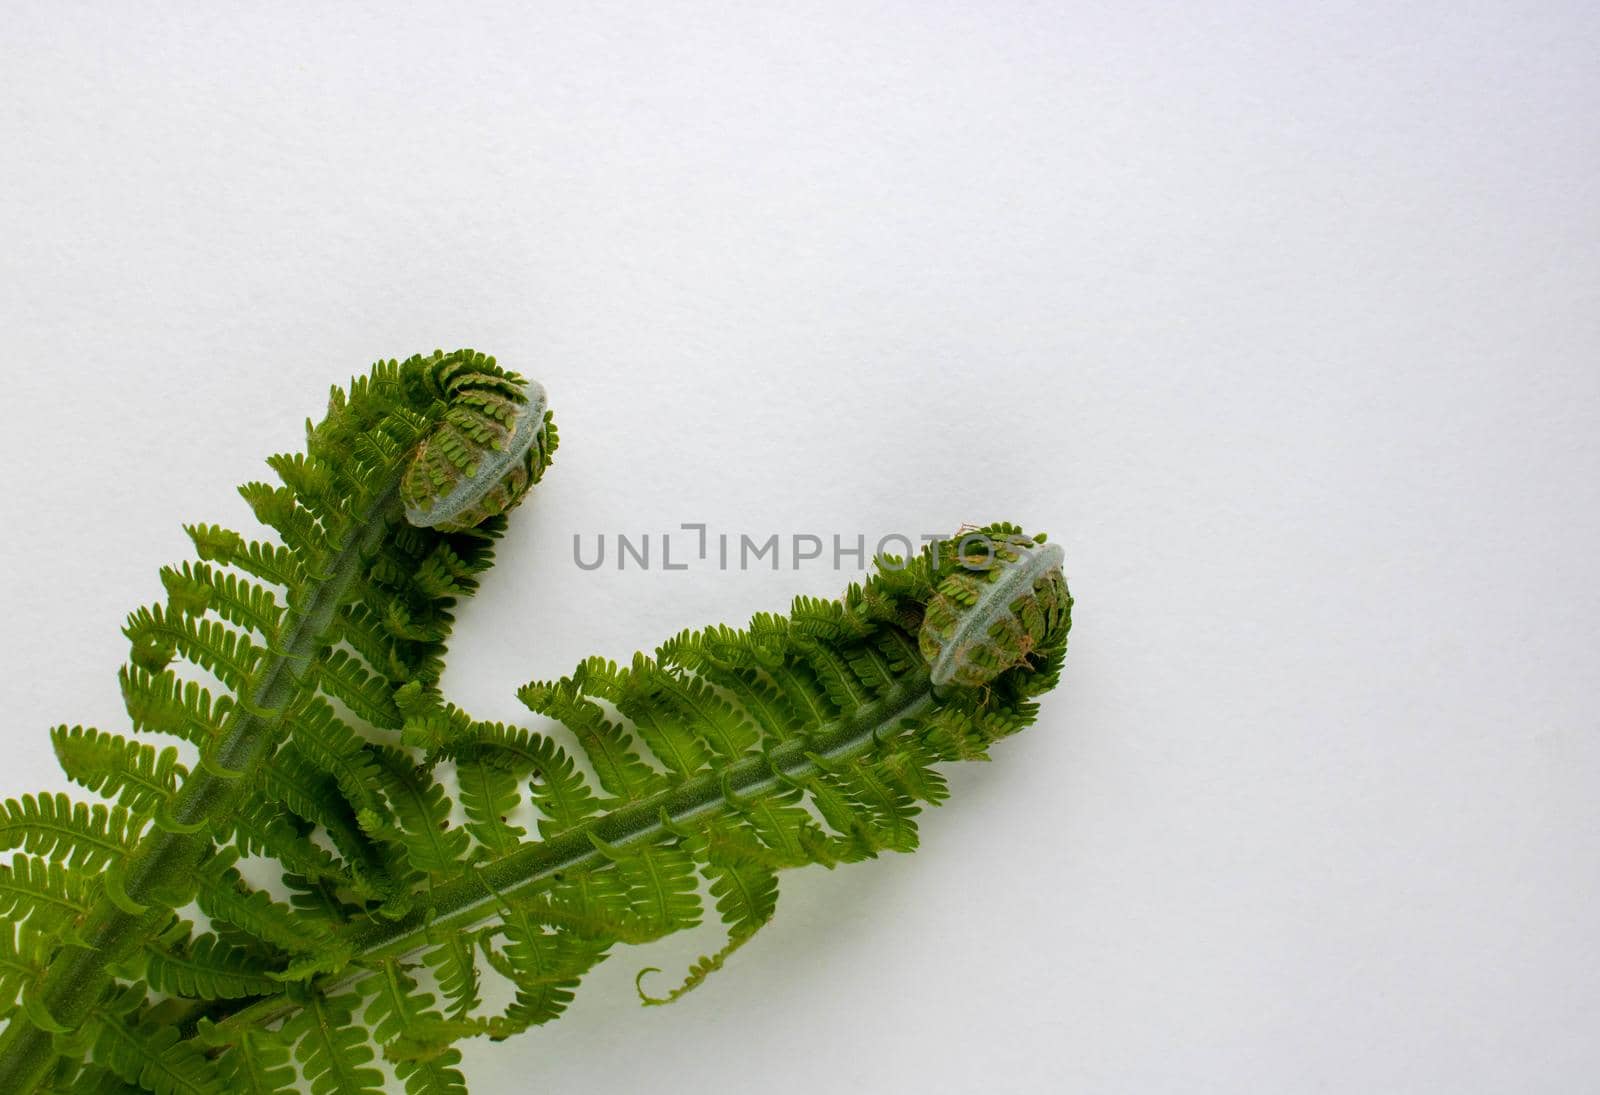 Shuttlecock-fern.Matteuccia spiral fern is a genus of ferns with one species: Matteuccia struthiopteris common names ostrich fern, fiddle fern. space for text by lapushka62